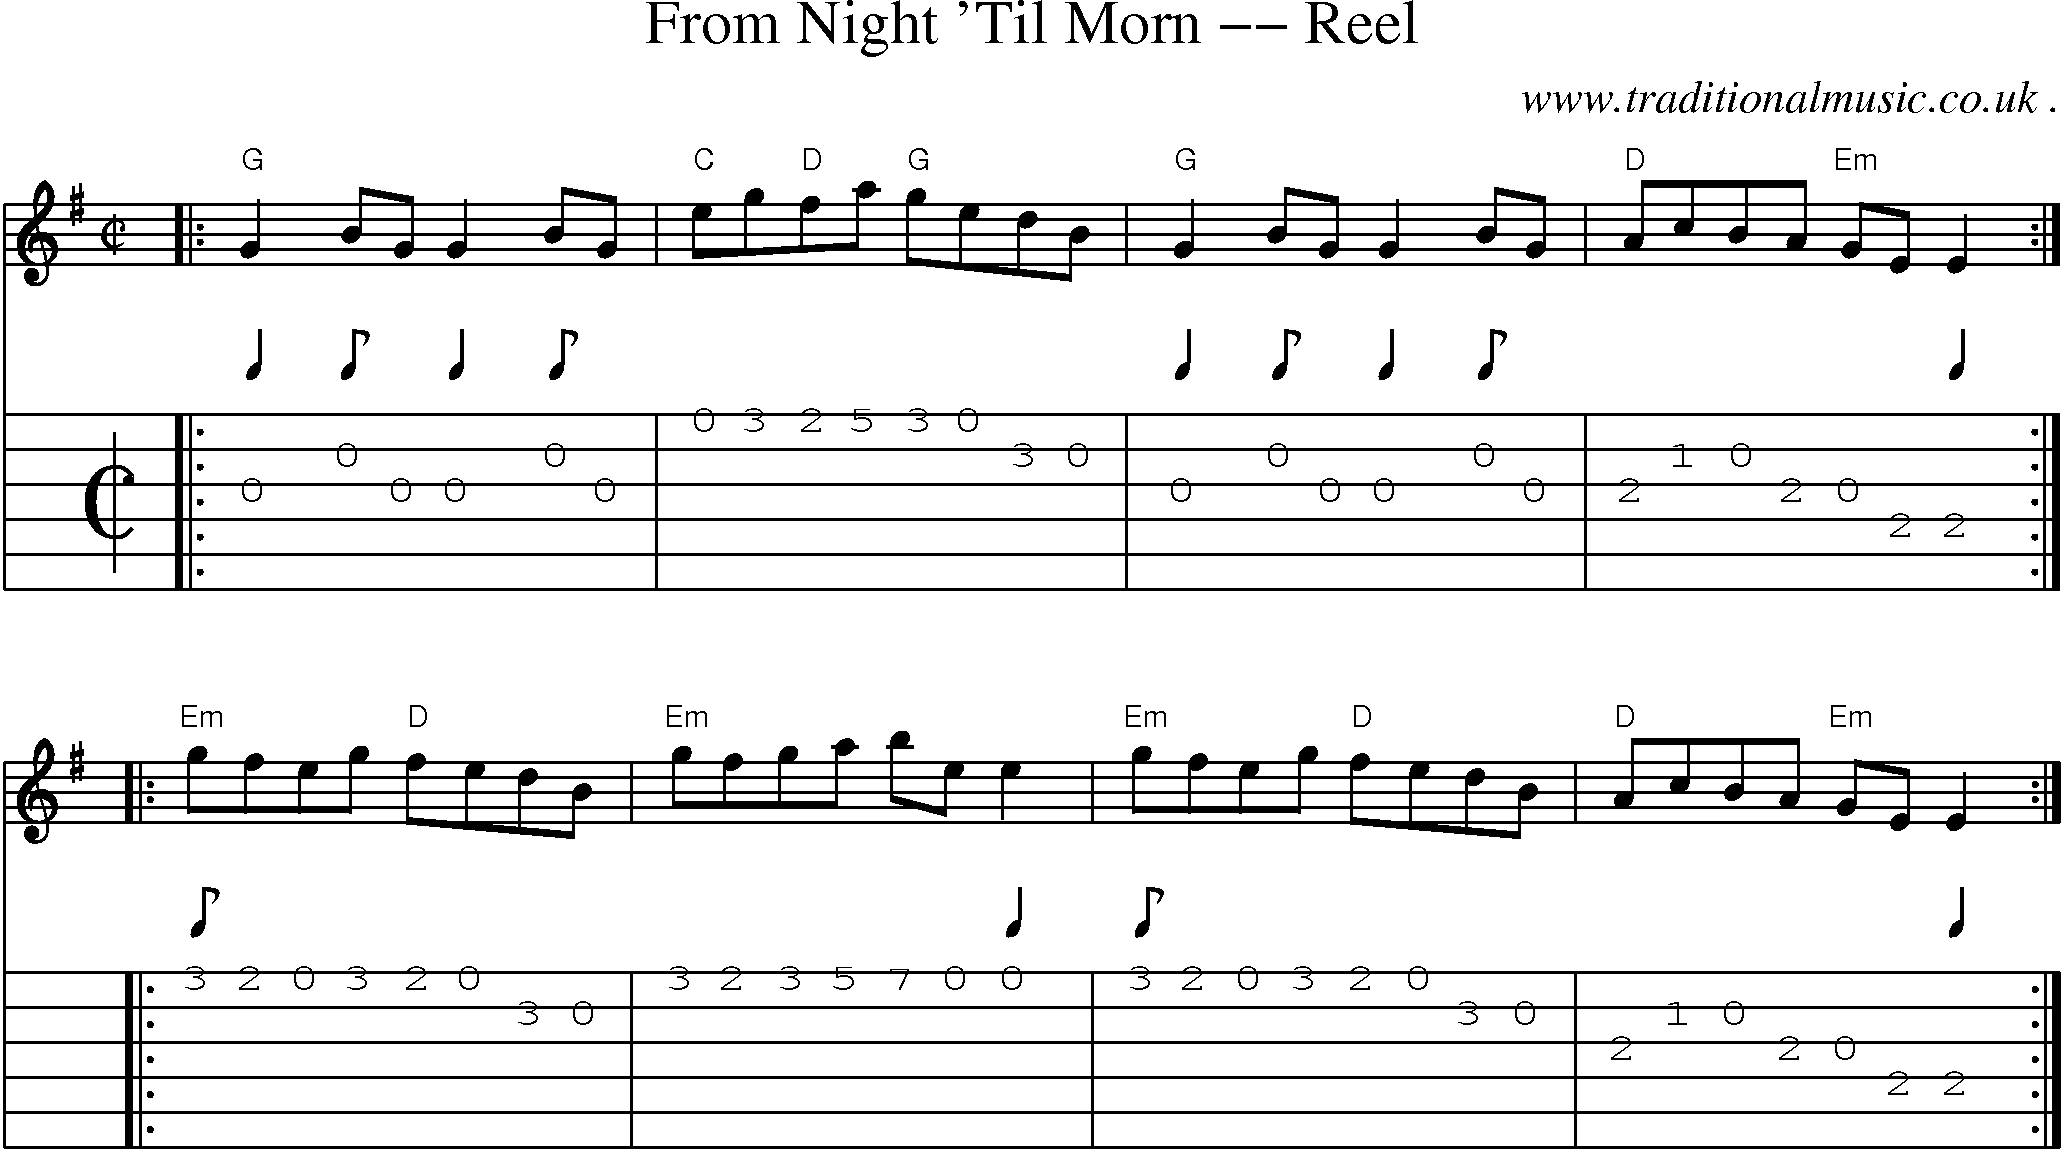 Sheet-music  score, Chords and Guitar Tabs for From Night Til Morn -- Reel